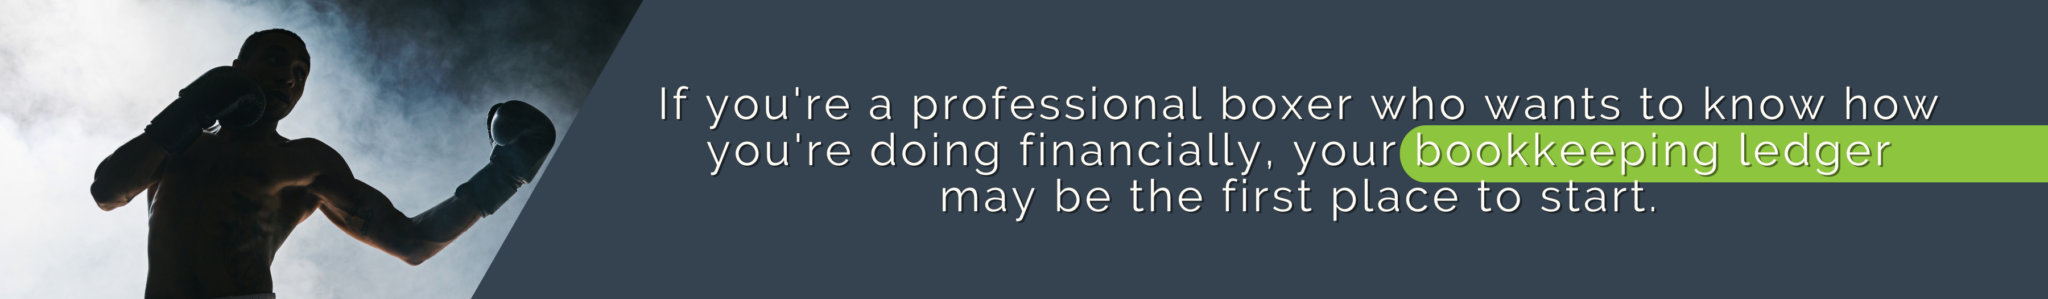 Fusion CPA-Professional boxer bookkeeping Accountant